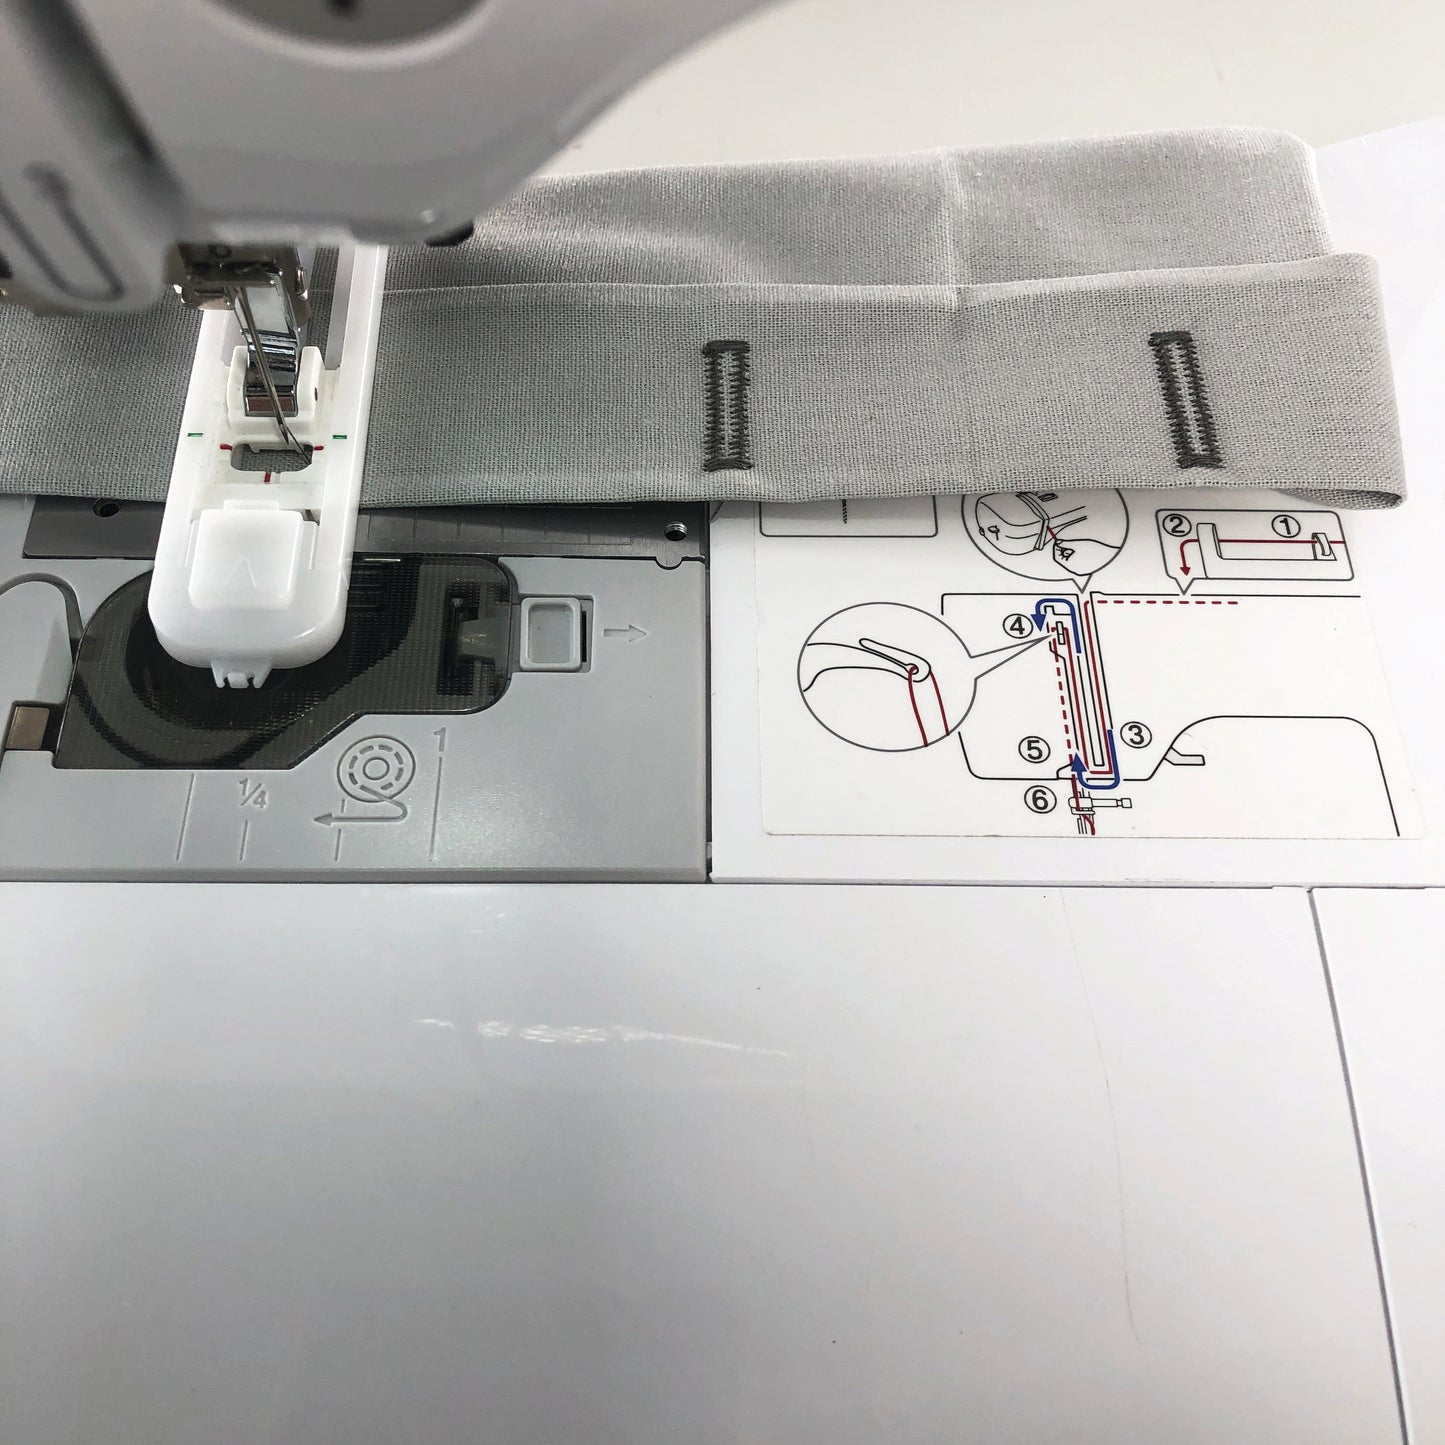 A16-Brother Sewing Machine